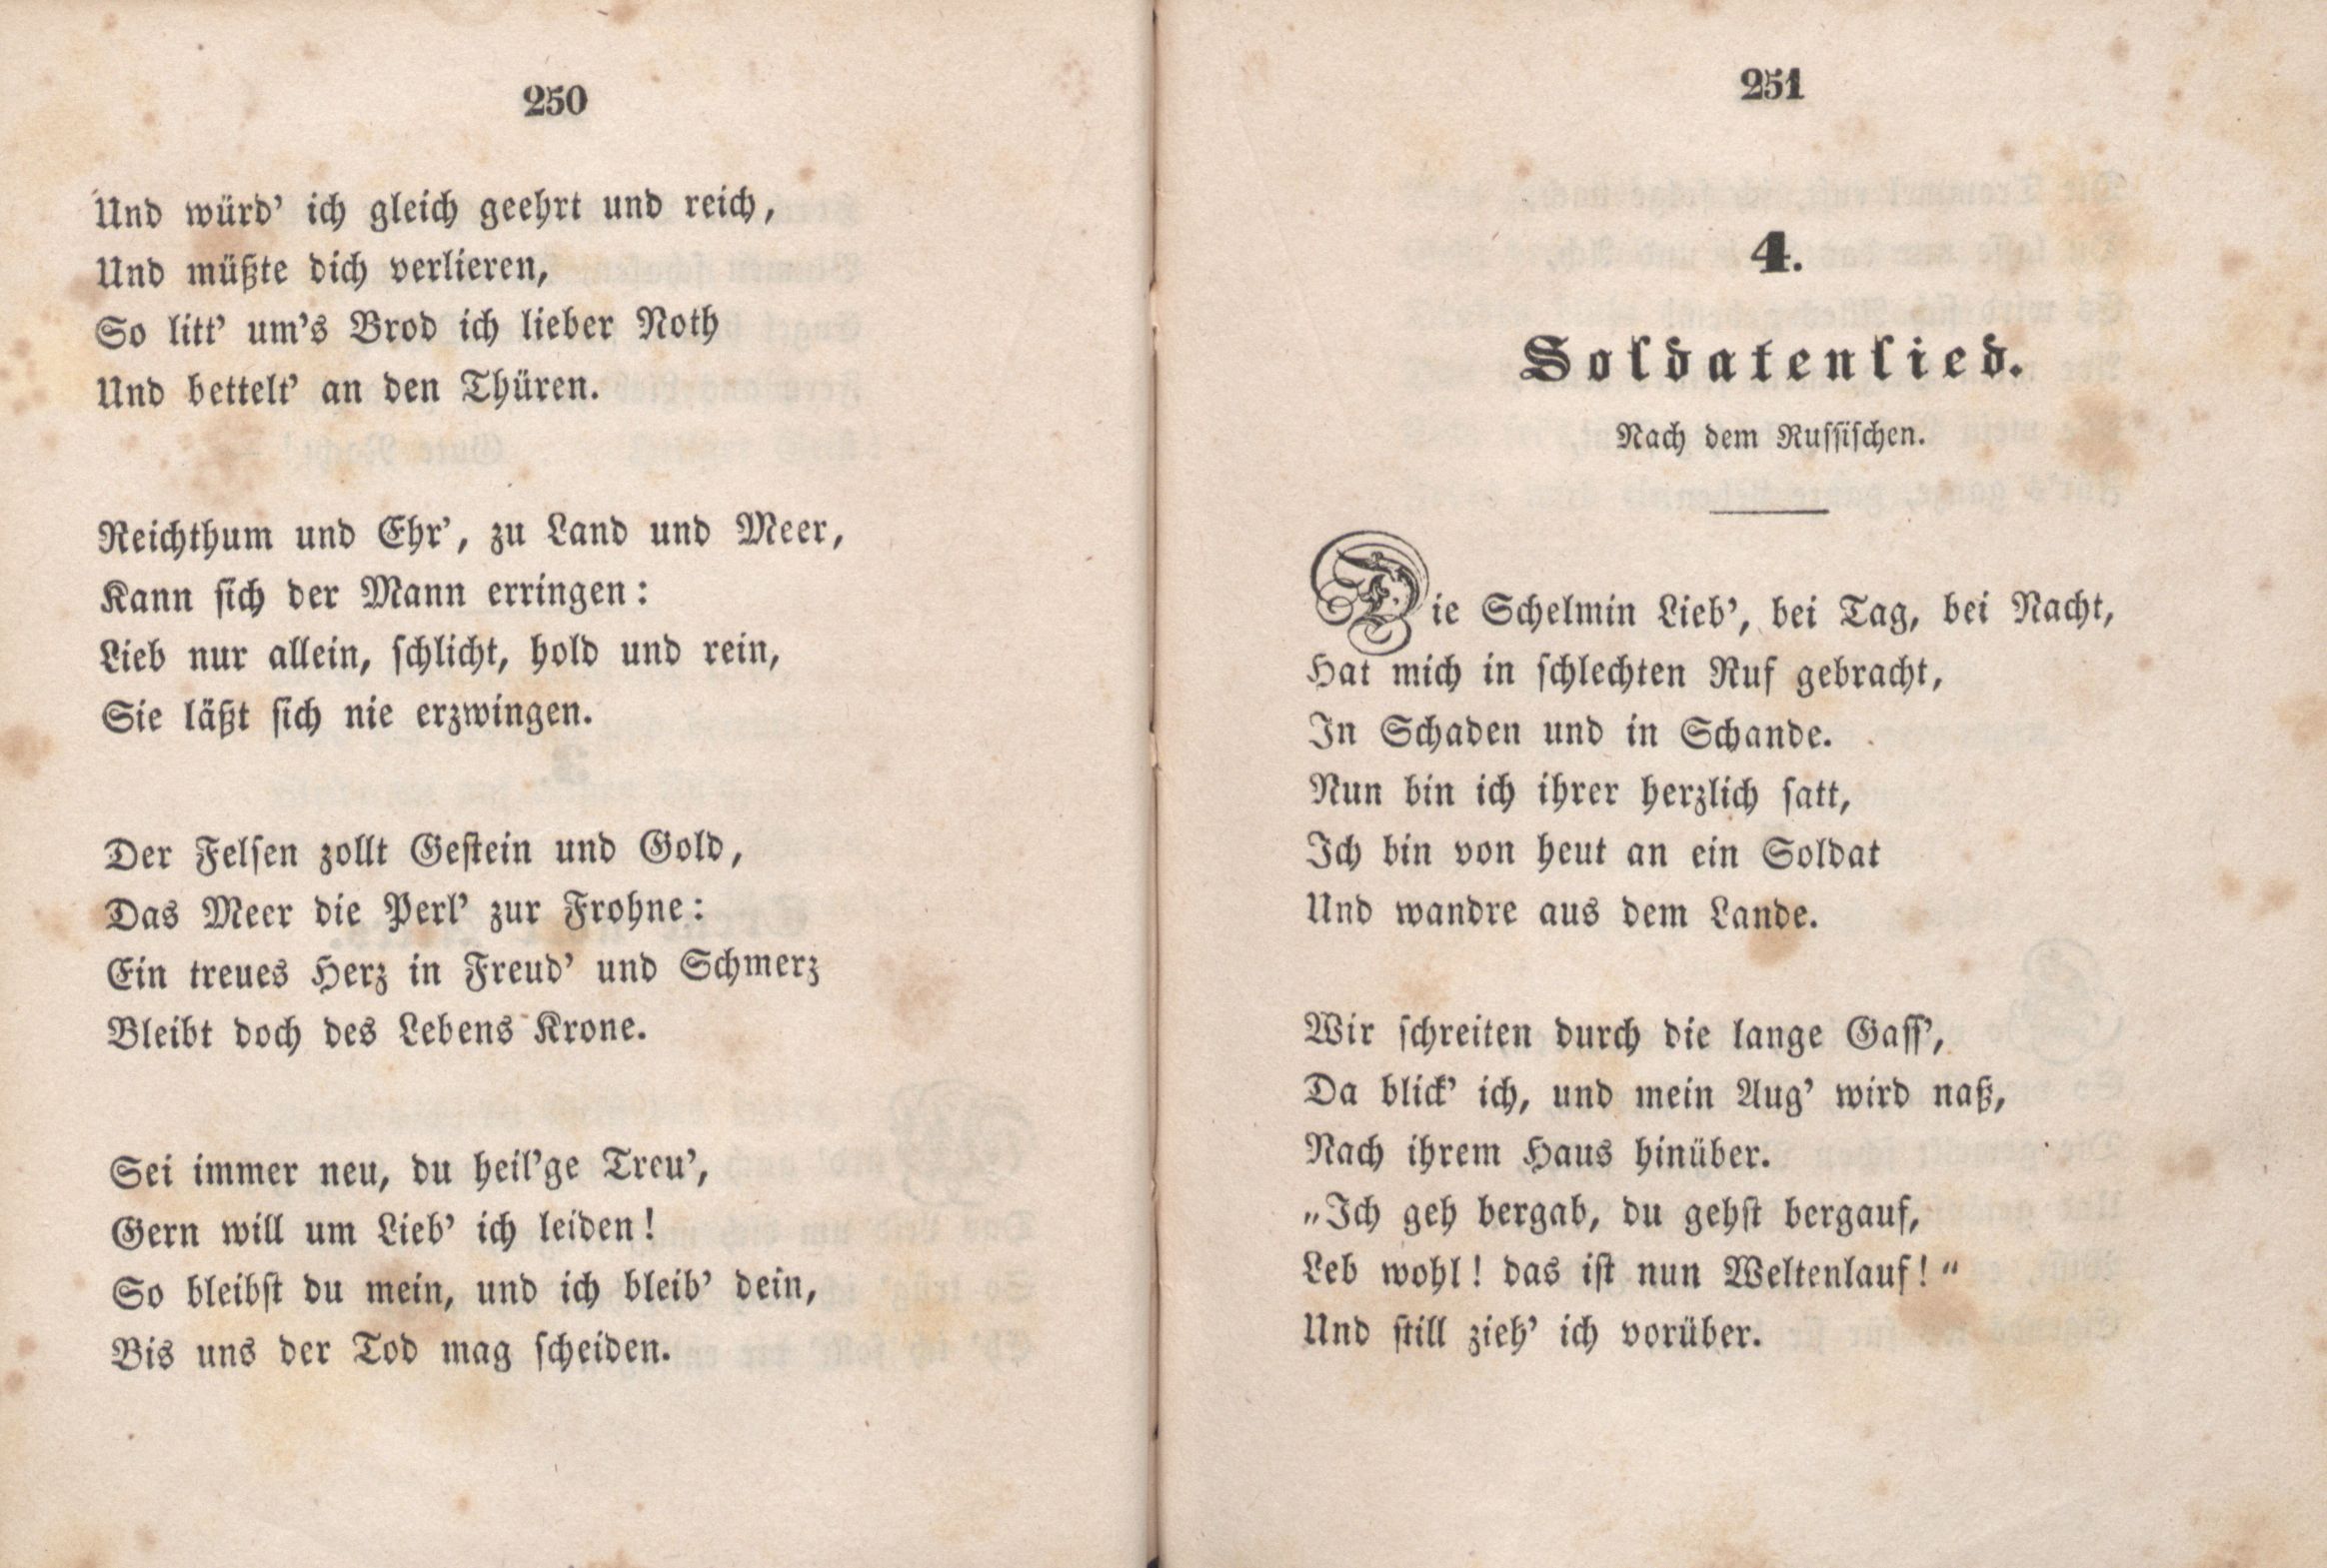 Soldatenlied (1846) | 1. (250-251) Main body of text